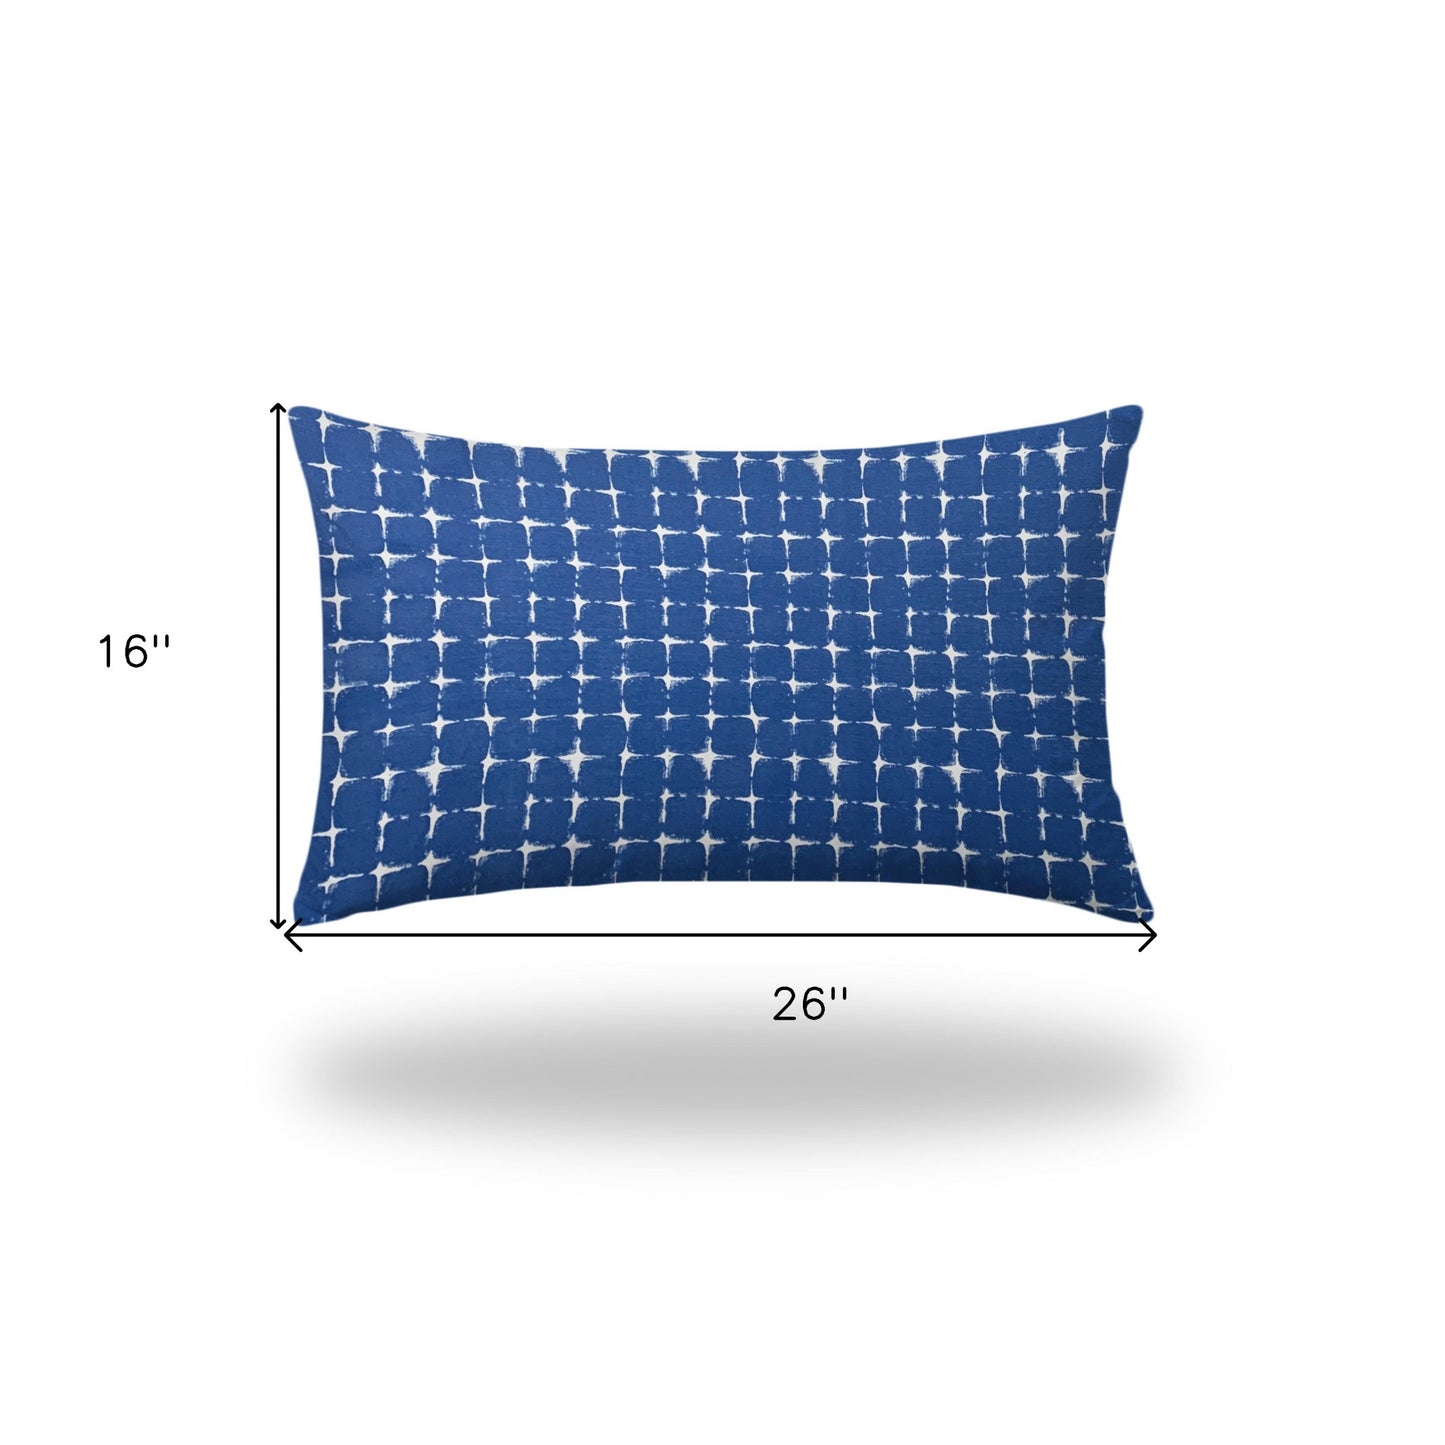 16" X 26" Blue And White Blown Seam Abstract Lumbar Indoor Outdoor Pillow